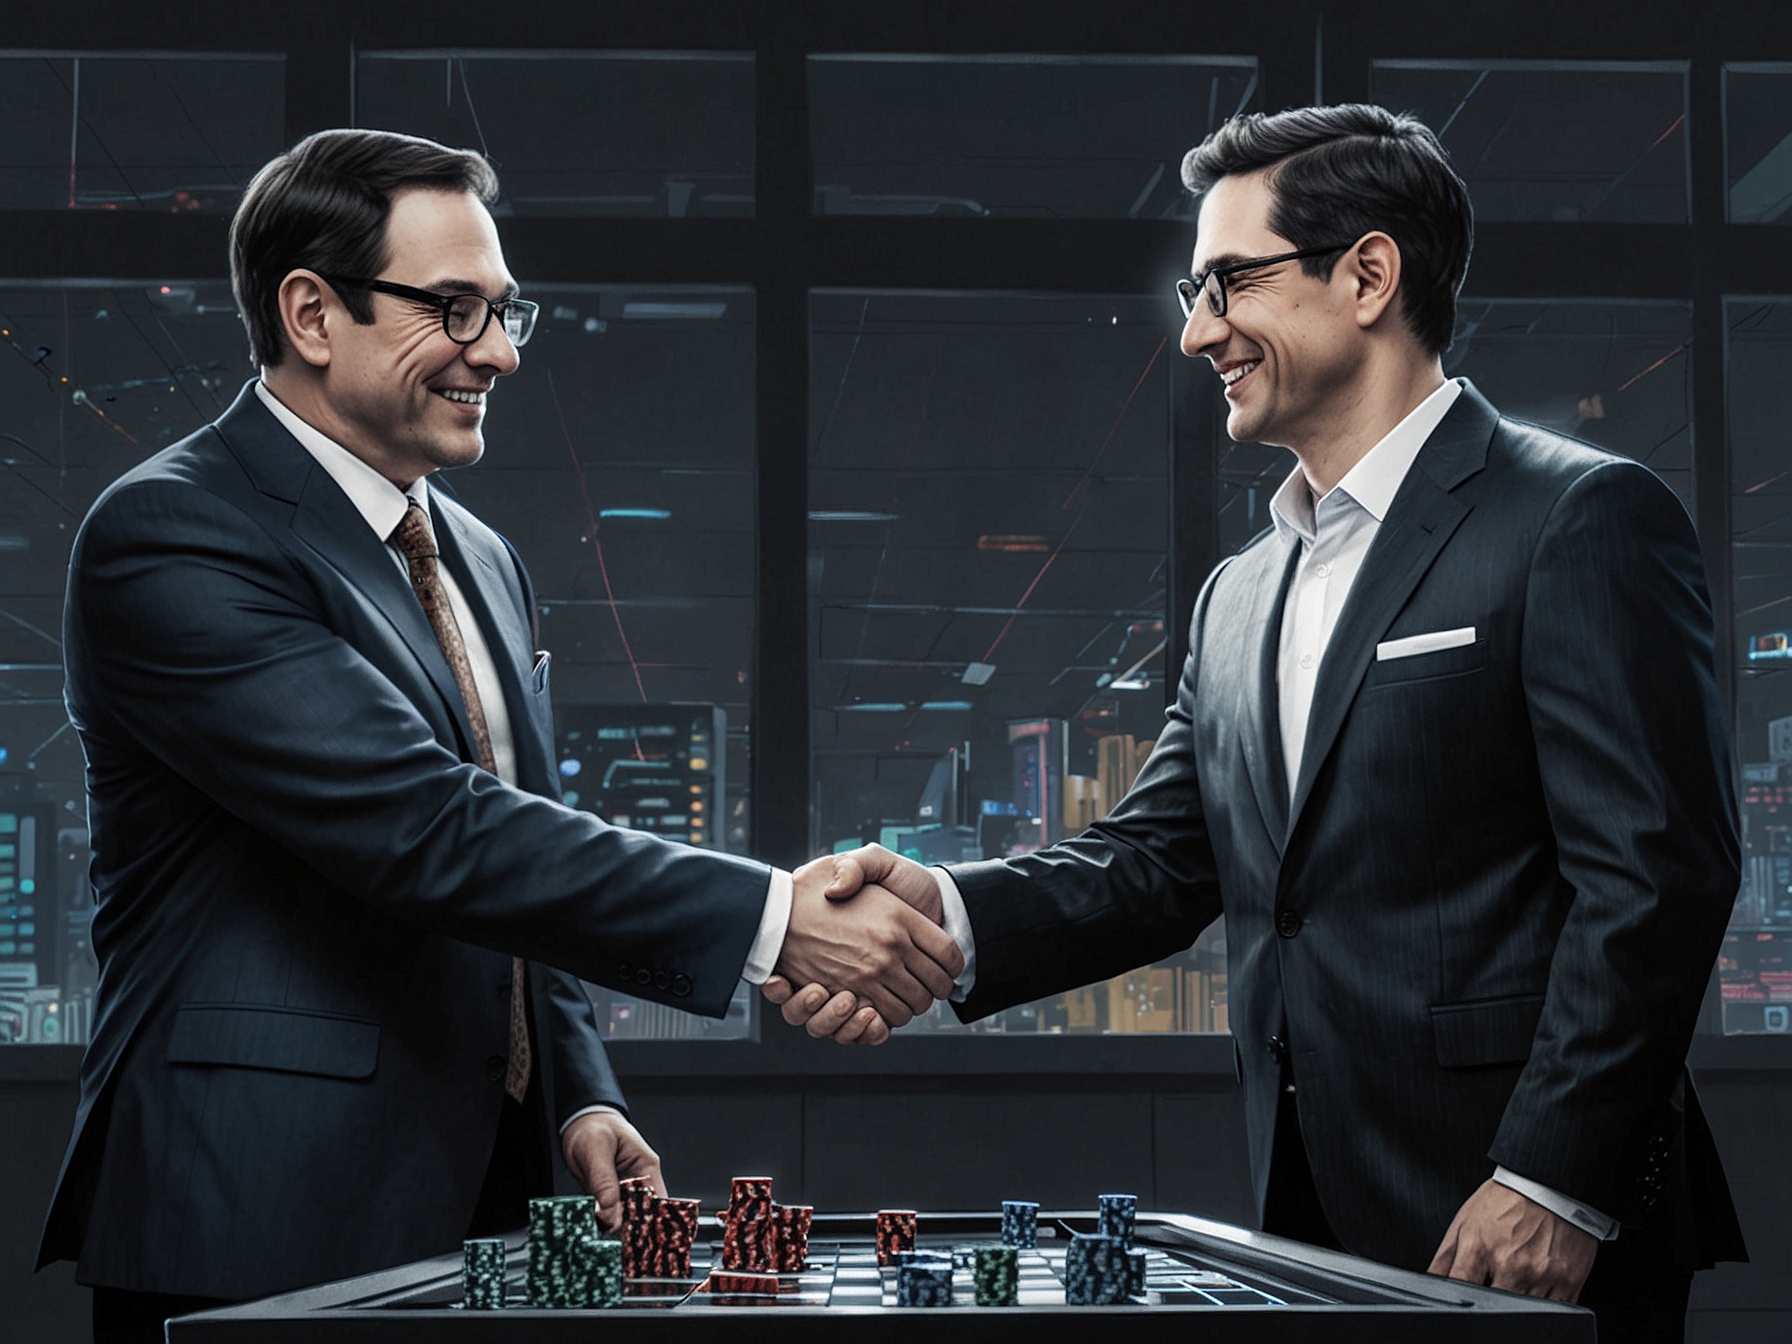 An illustration of executives from Gaming Innovation Group and Ventures Lab shaking hands, symbolizing the strategic partnership to expand iGaming solutions in Ontario with advanced AI tools.